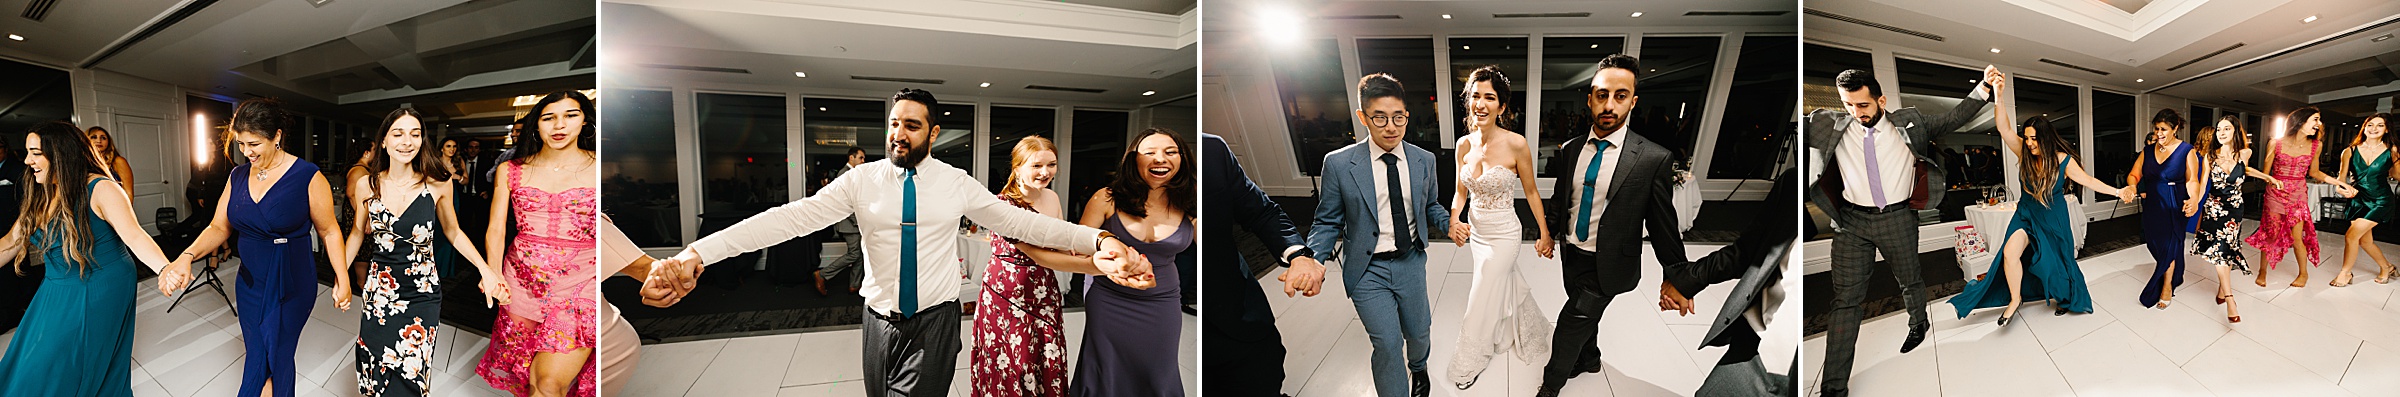 Guests busting out moves on the dance floor at Wabeek Country Club by Detroit Wedding Photographer Michele Maloney